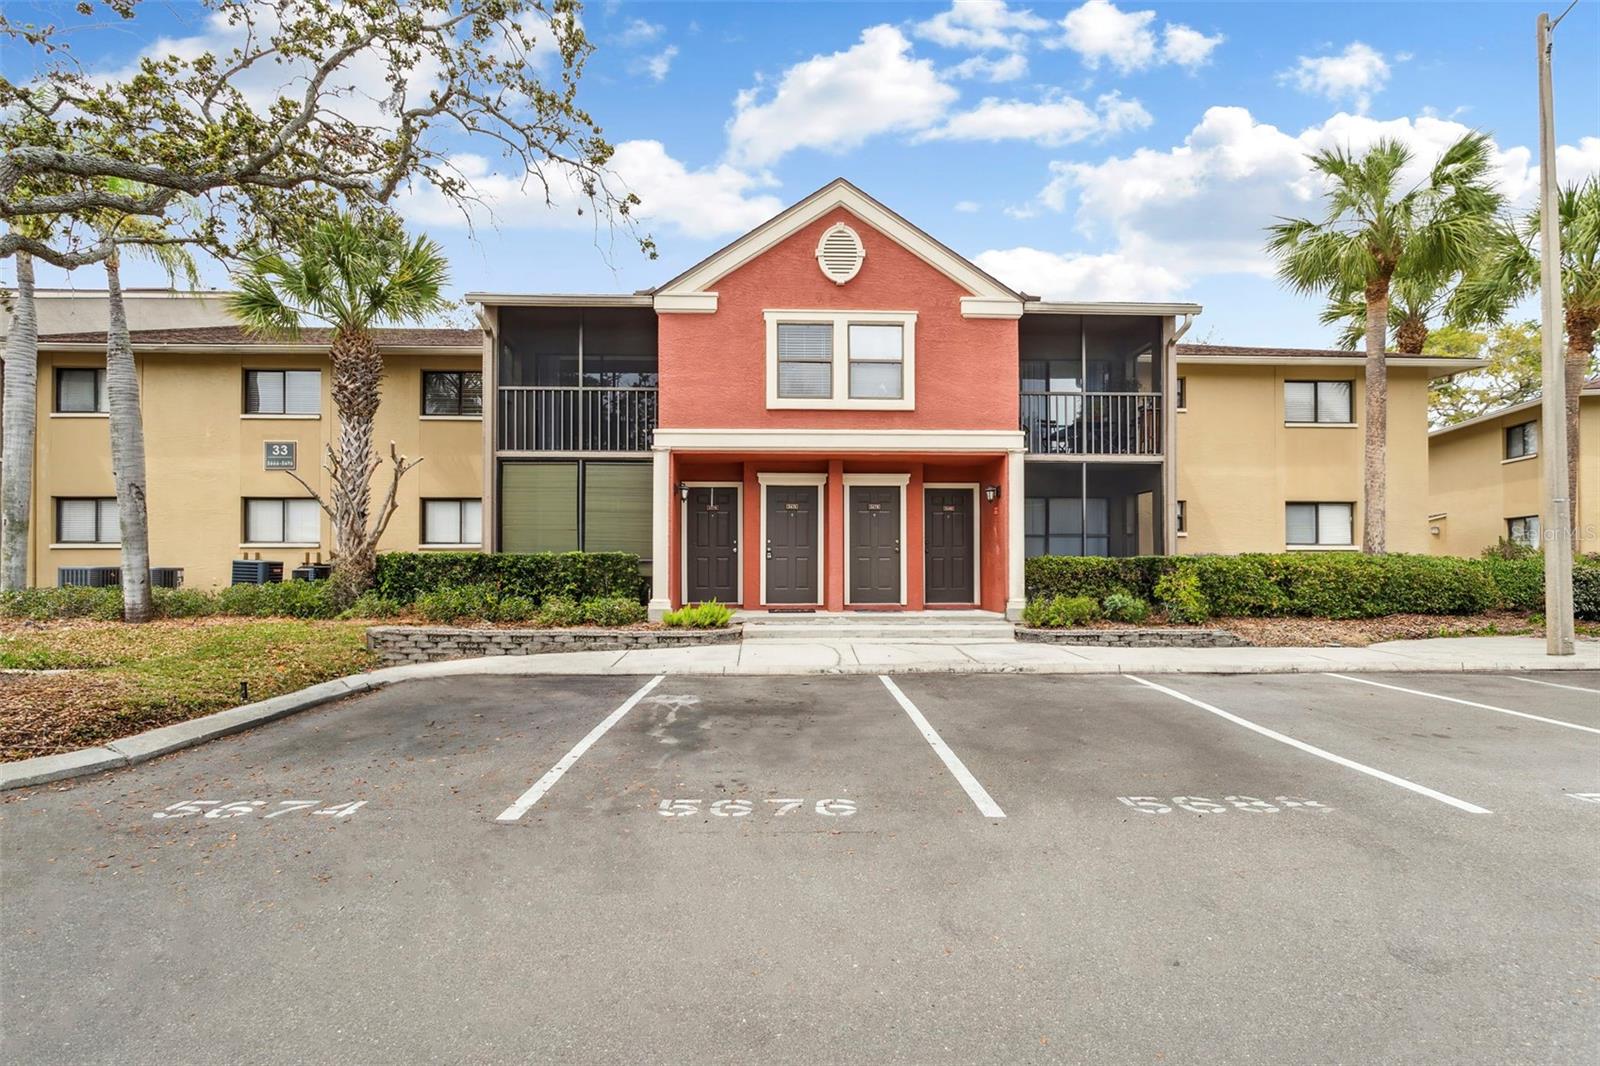 Welcome home to 5676 Baywater Dr located in a waterfront community in Tampa, FL! Your reserved parking spot is located directly outside your door!